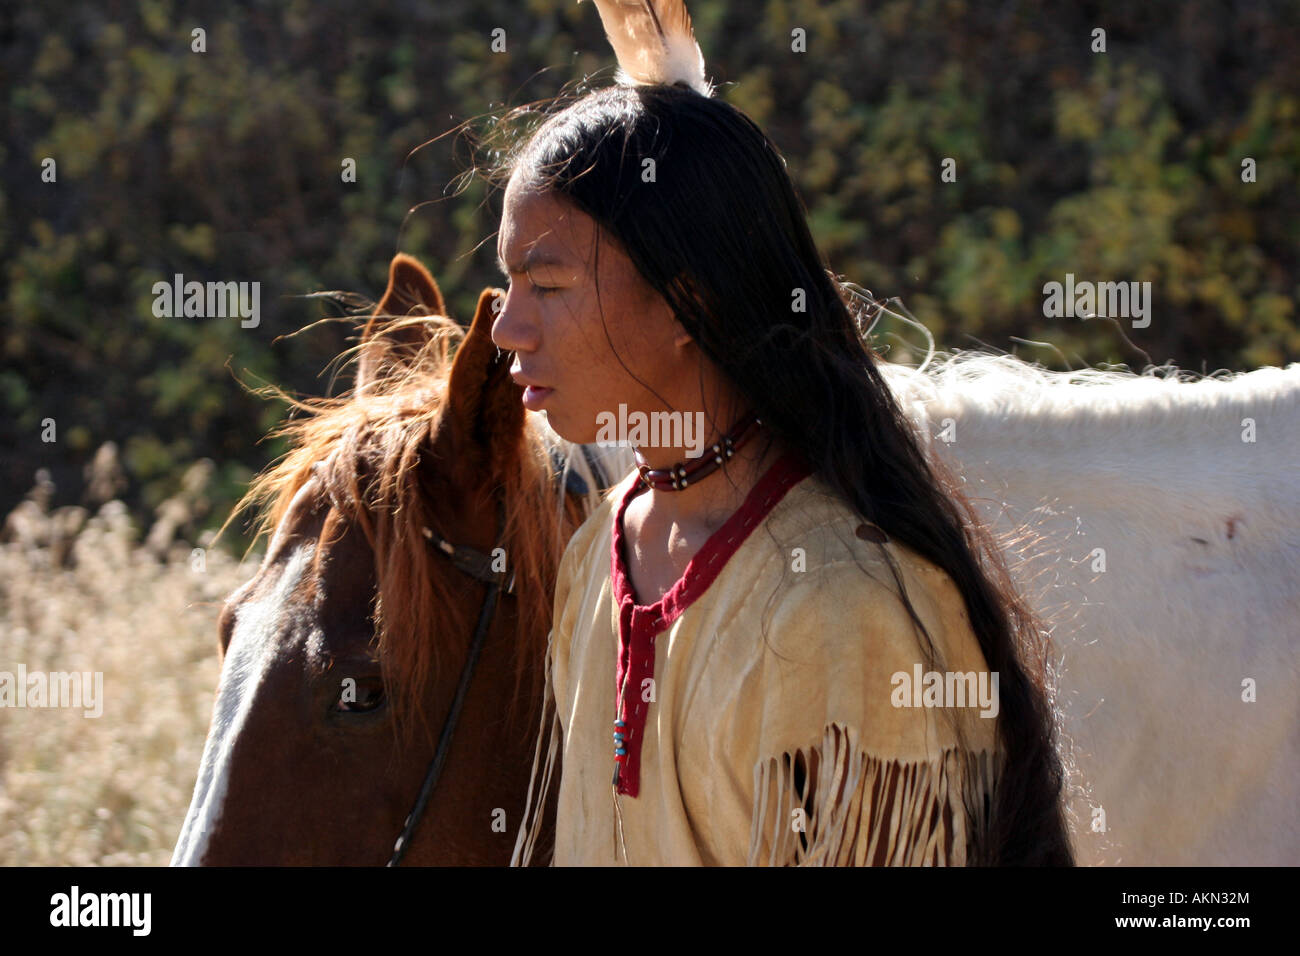 A Native American Indian boy wearing a feather standing next to a horse Stock Photo